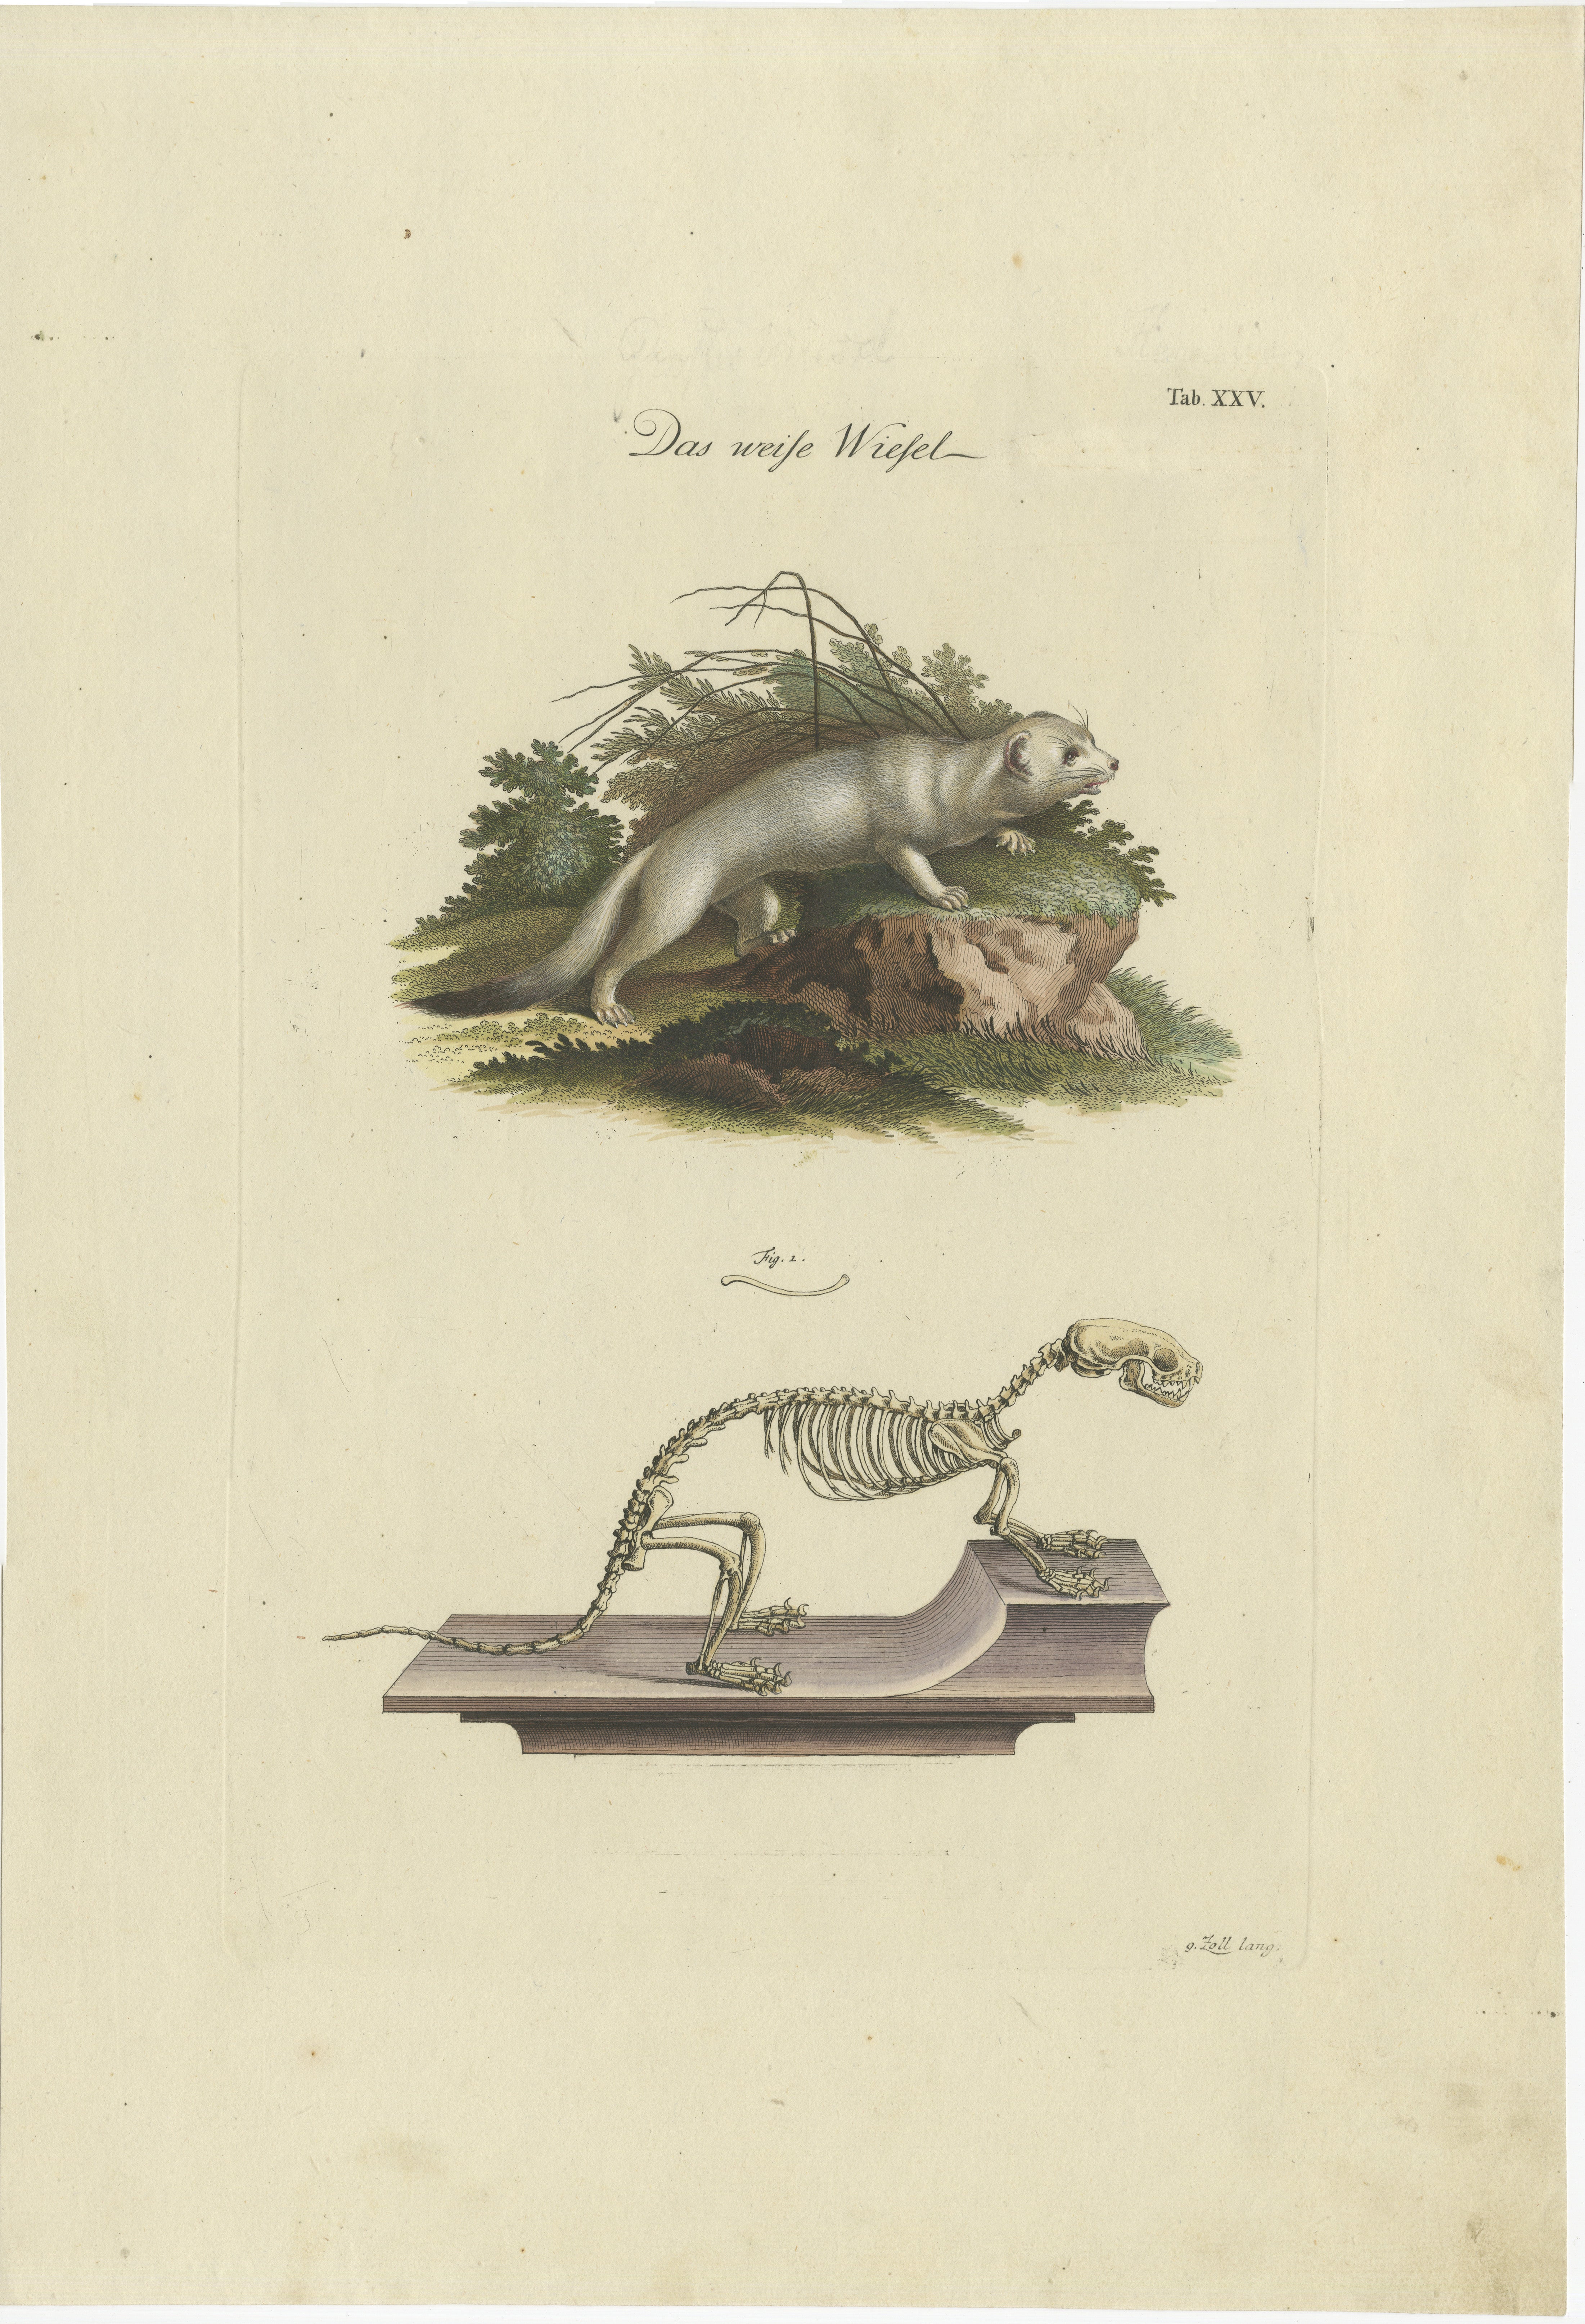 This rather large original antique engraving on strong paper depicts two images: one of a weasel in its natural habitat and another of its skeletal structure. 

The German title 